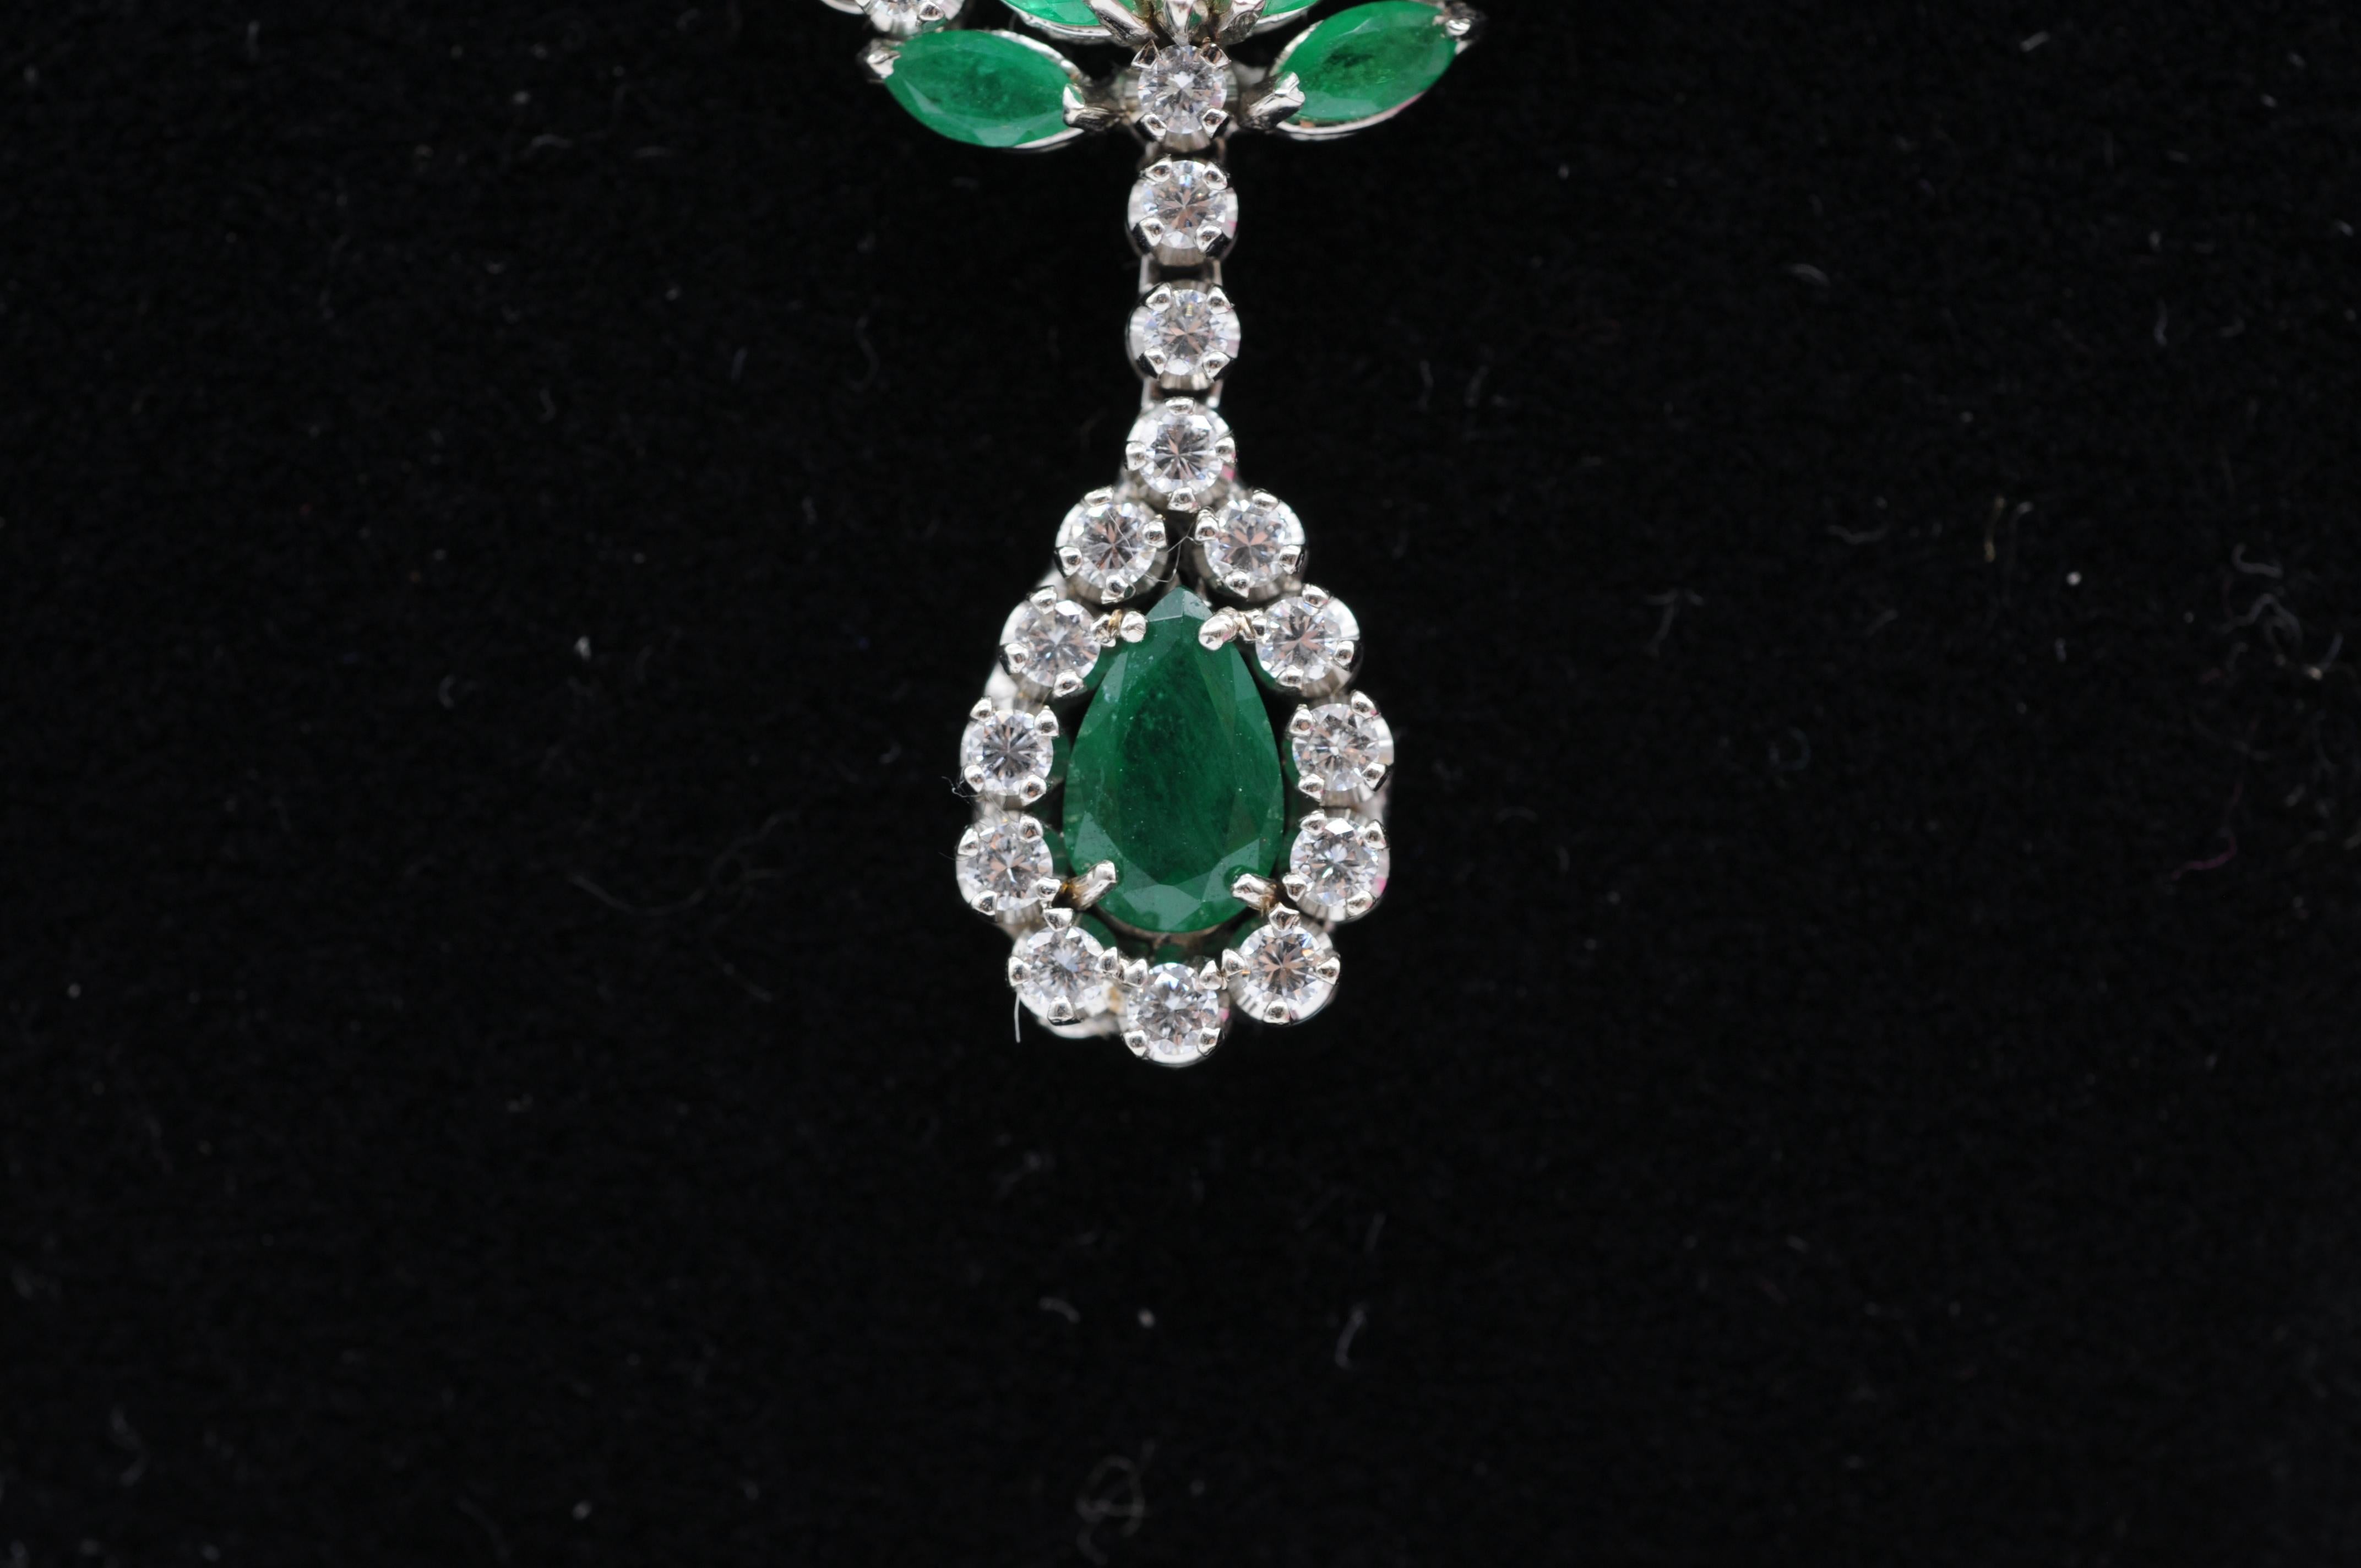 Wonderful Art deco style dreamfull necklace with emeralds and diamonds For Sale 11